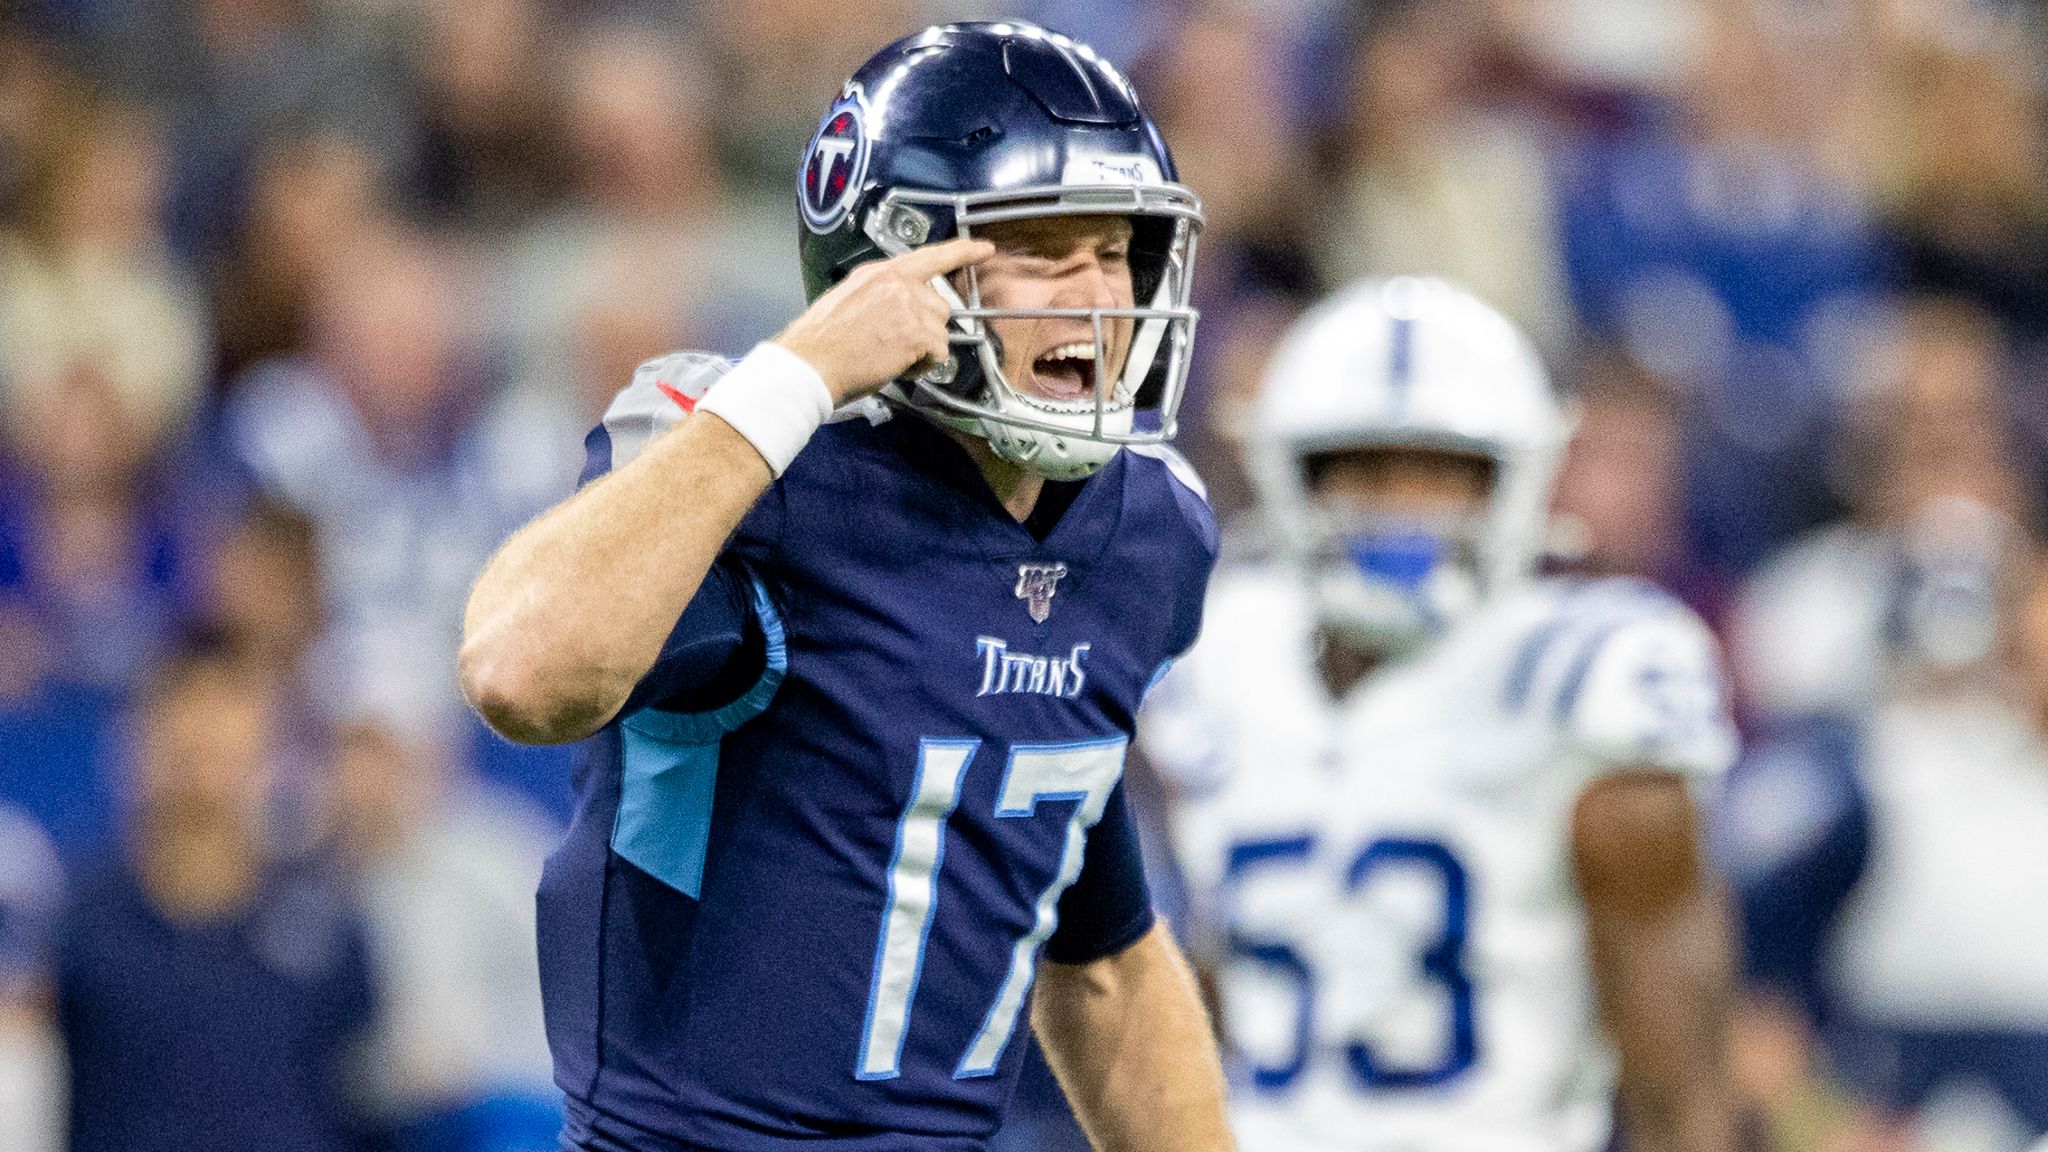 Tannehill leads Titans to win over former team